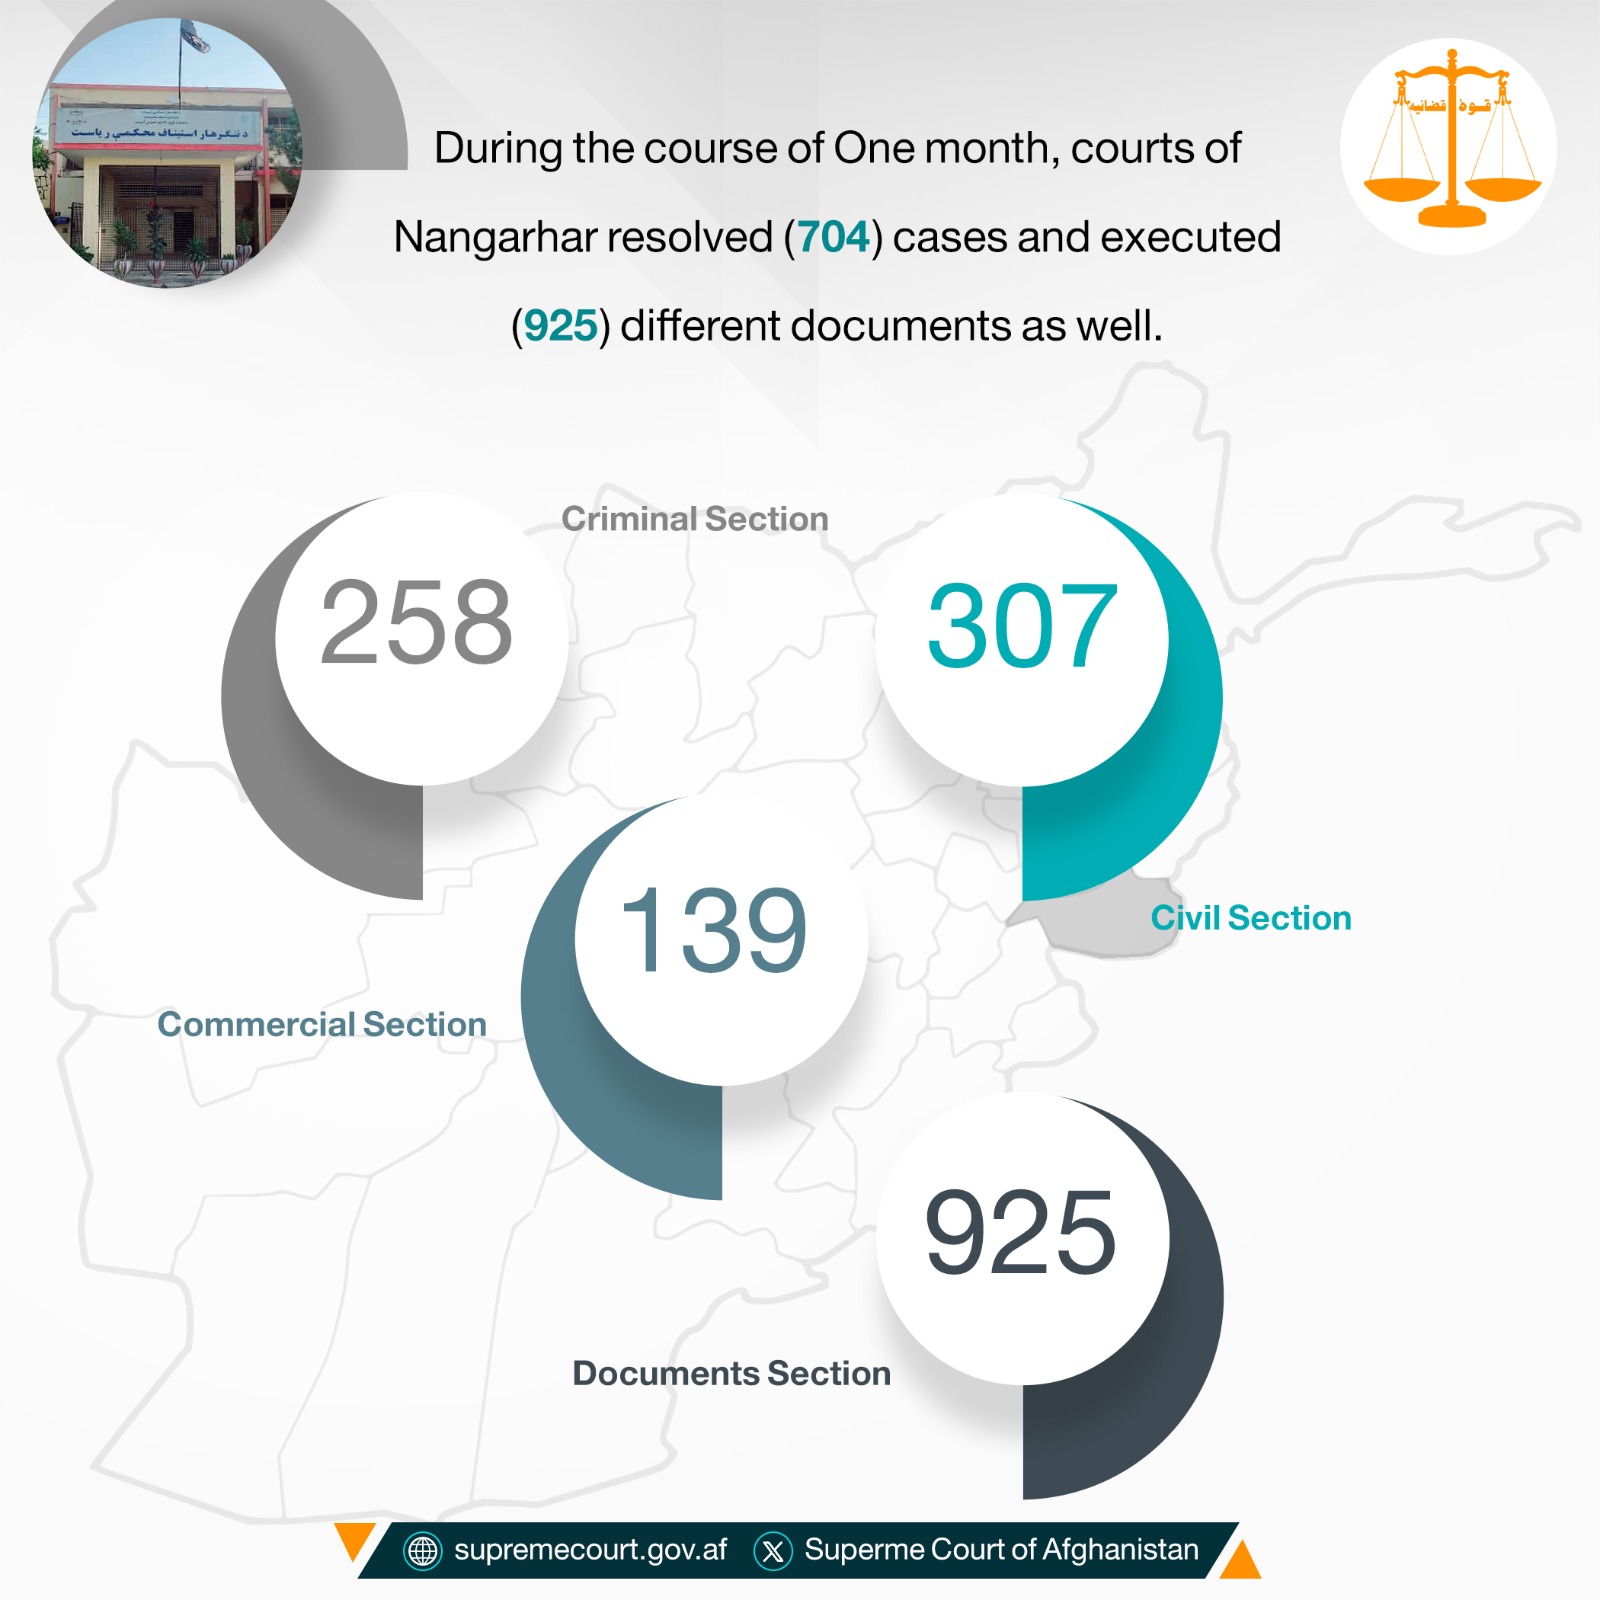 During the course of One month, courts of Nangarhar resolved (704) cases and executed (925) different documents as well.